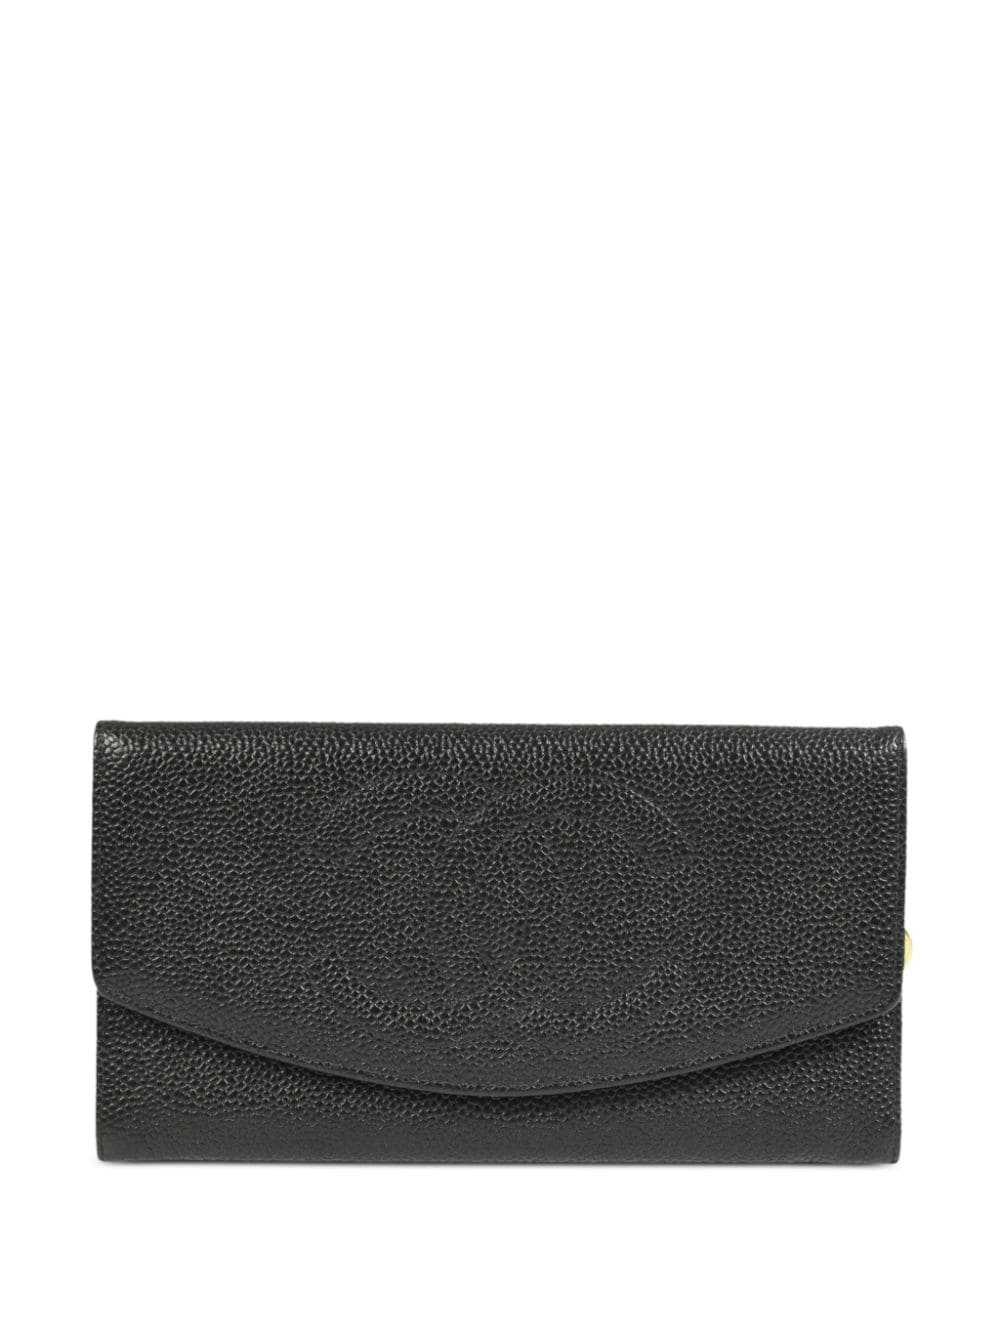 CHANEL Pre-Owned 1998 long flap wallet - Black - image 1